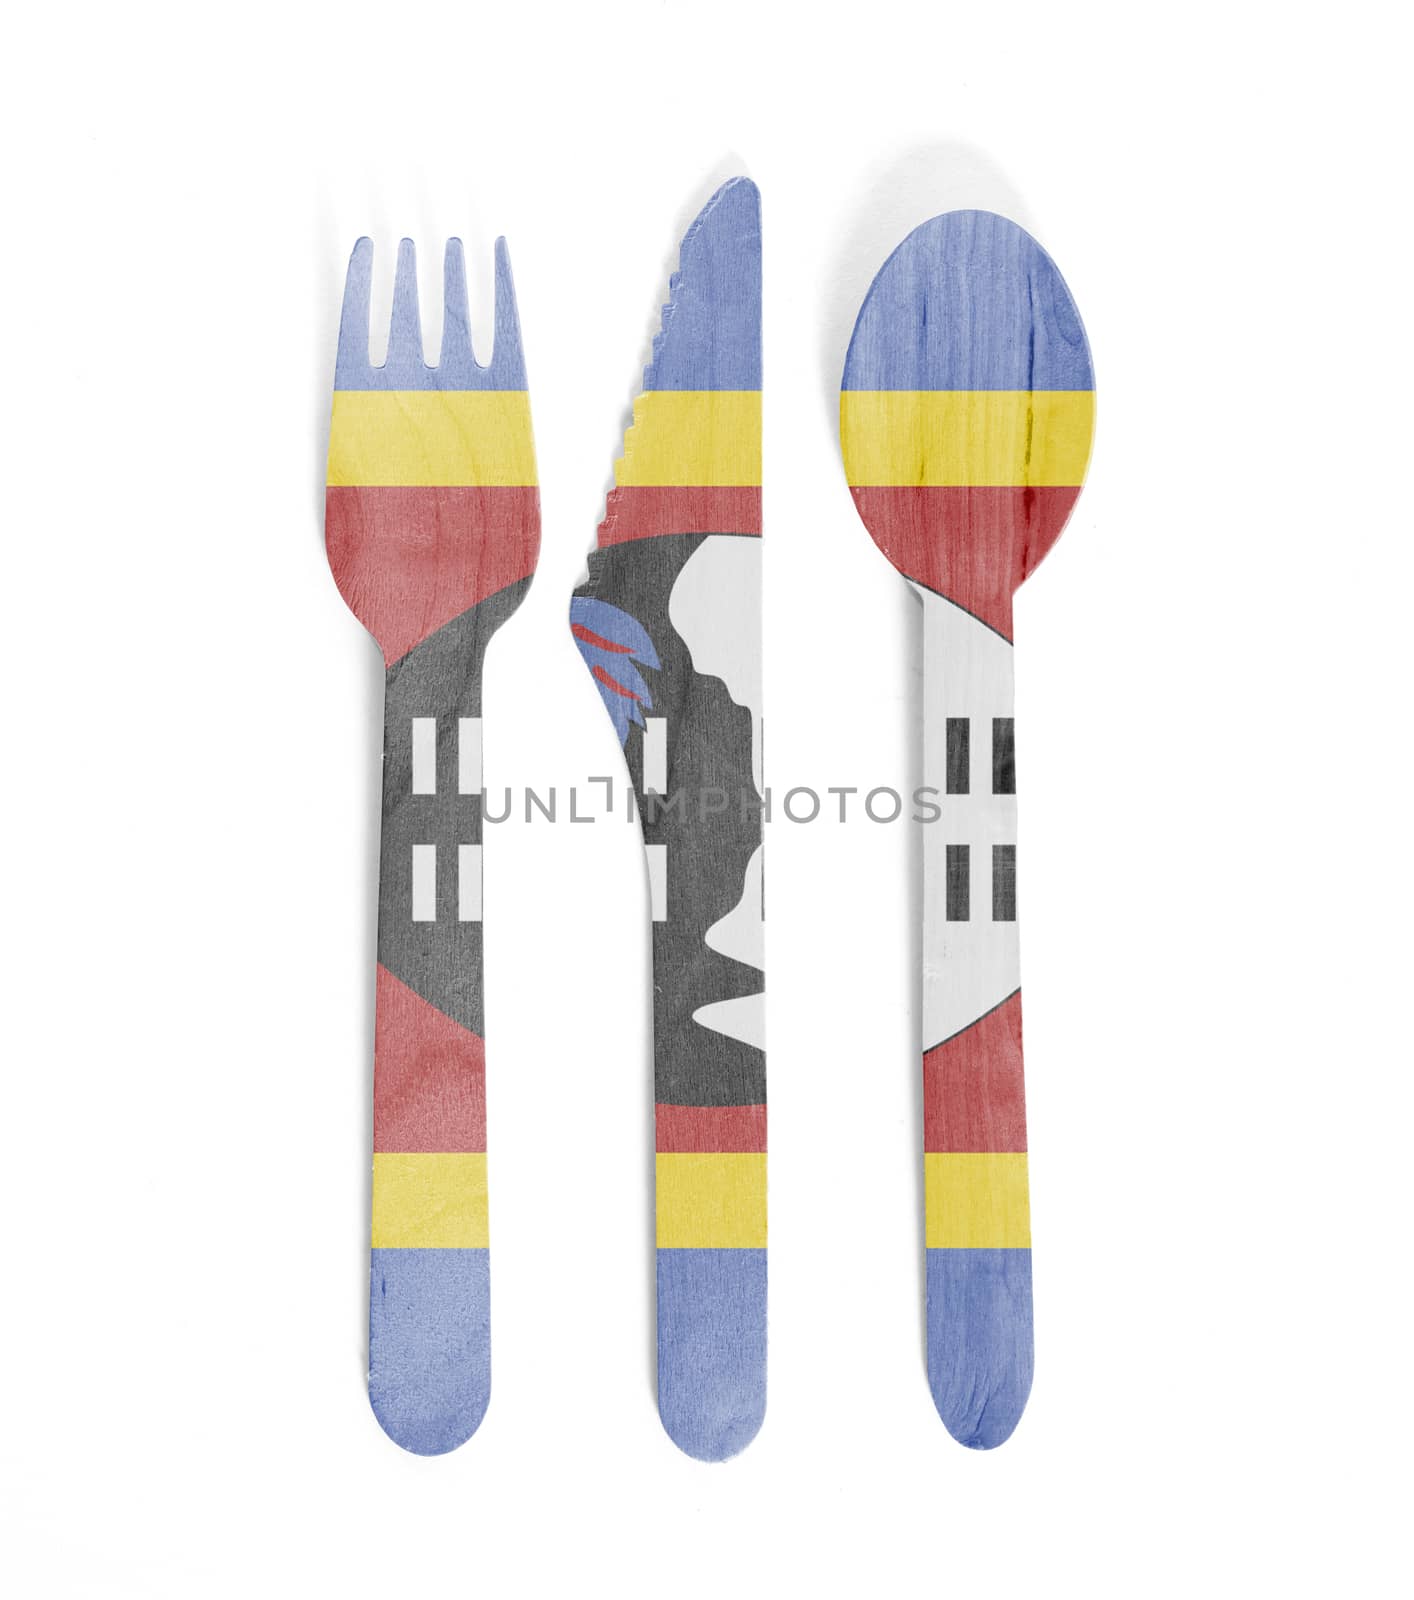 Eco friendly wooden cutlery - Plastic free concept - Isolated - Flag of Swaziland